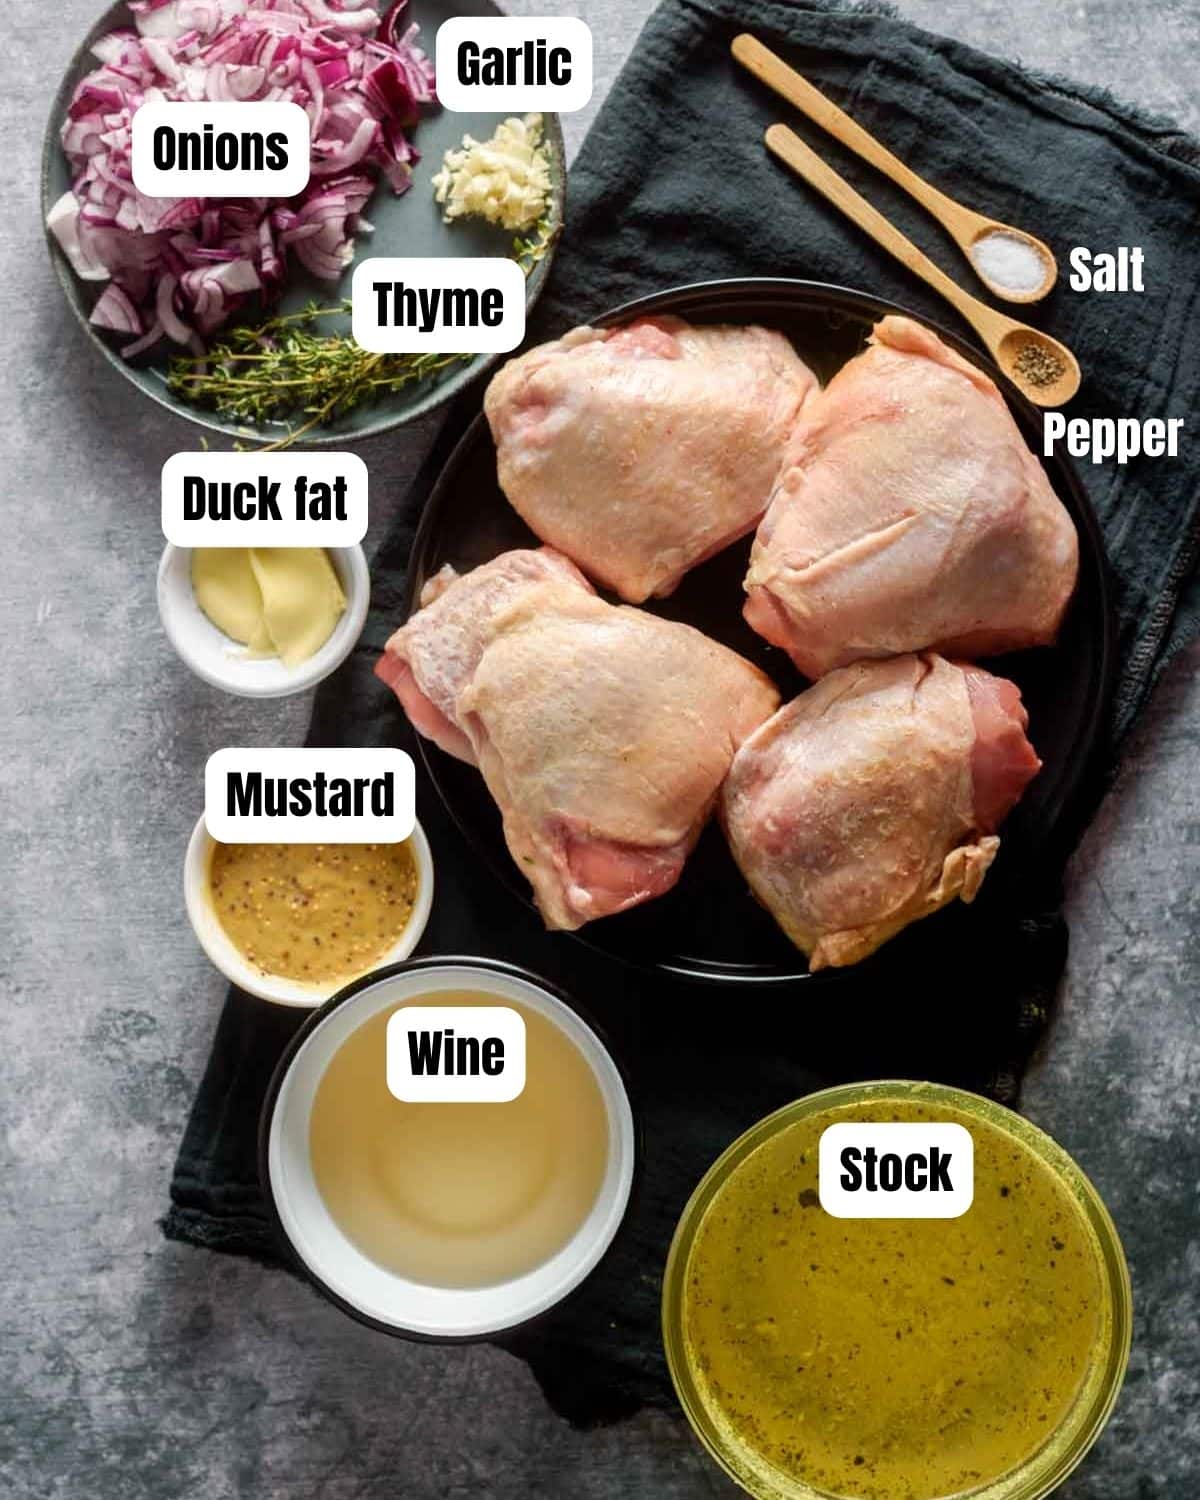 ingredients for chicken in white wine sauce